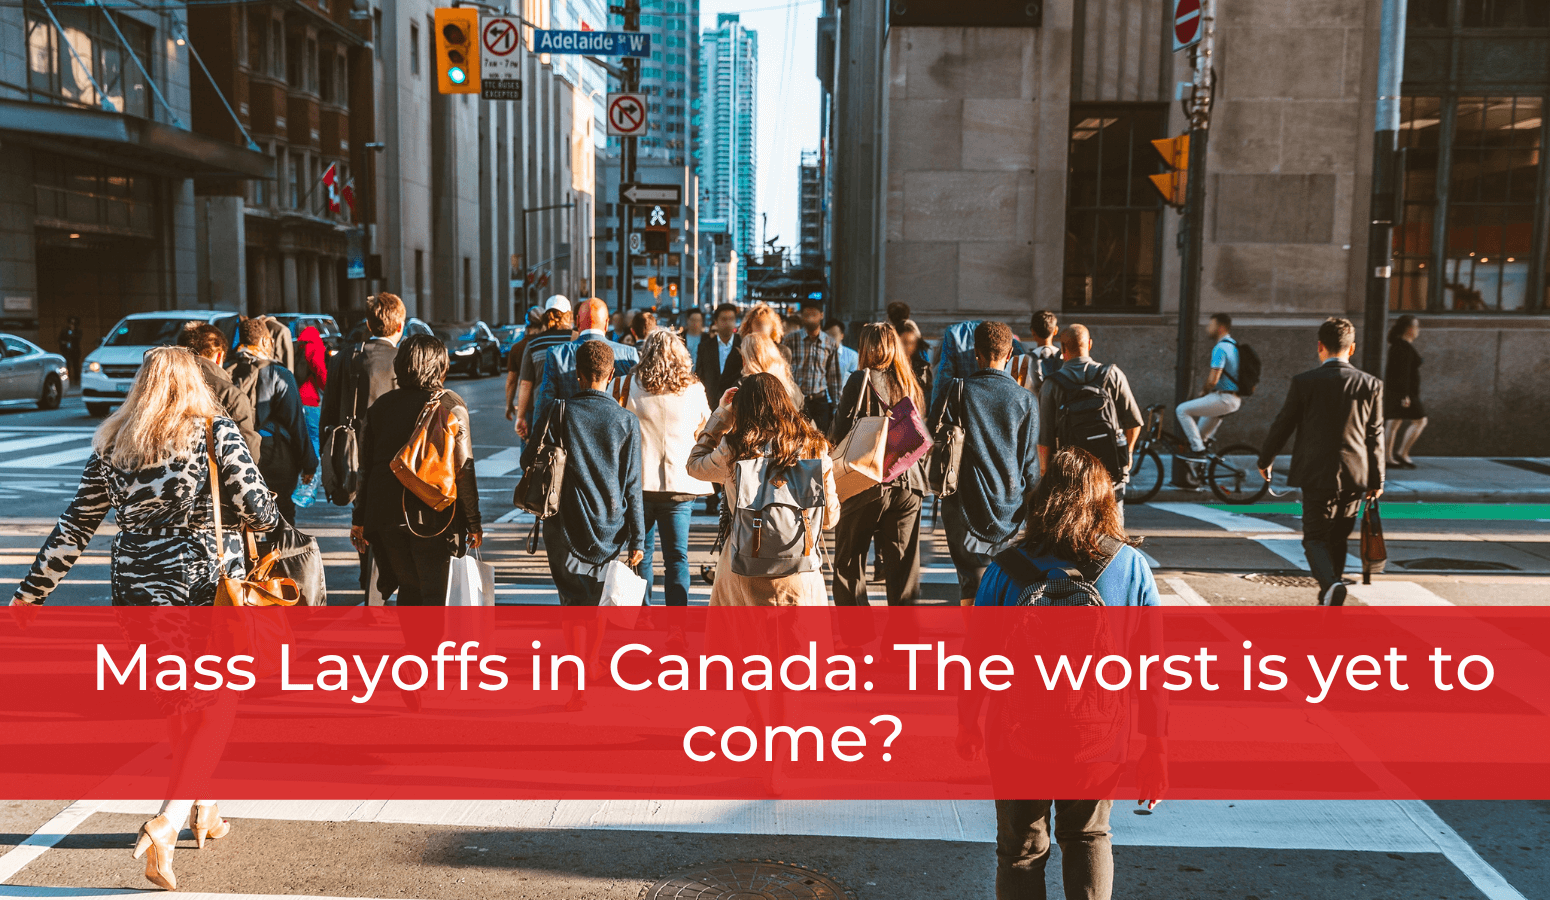 Featured image for “Mass Layoffs in Canada: The worst is yet to come?”